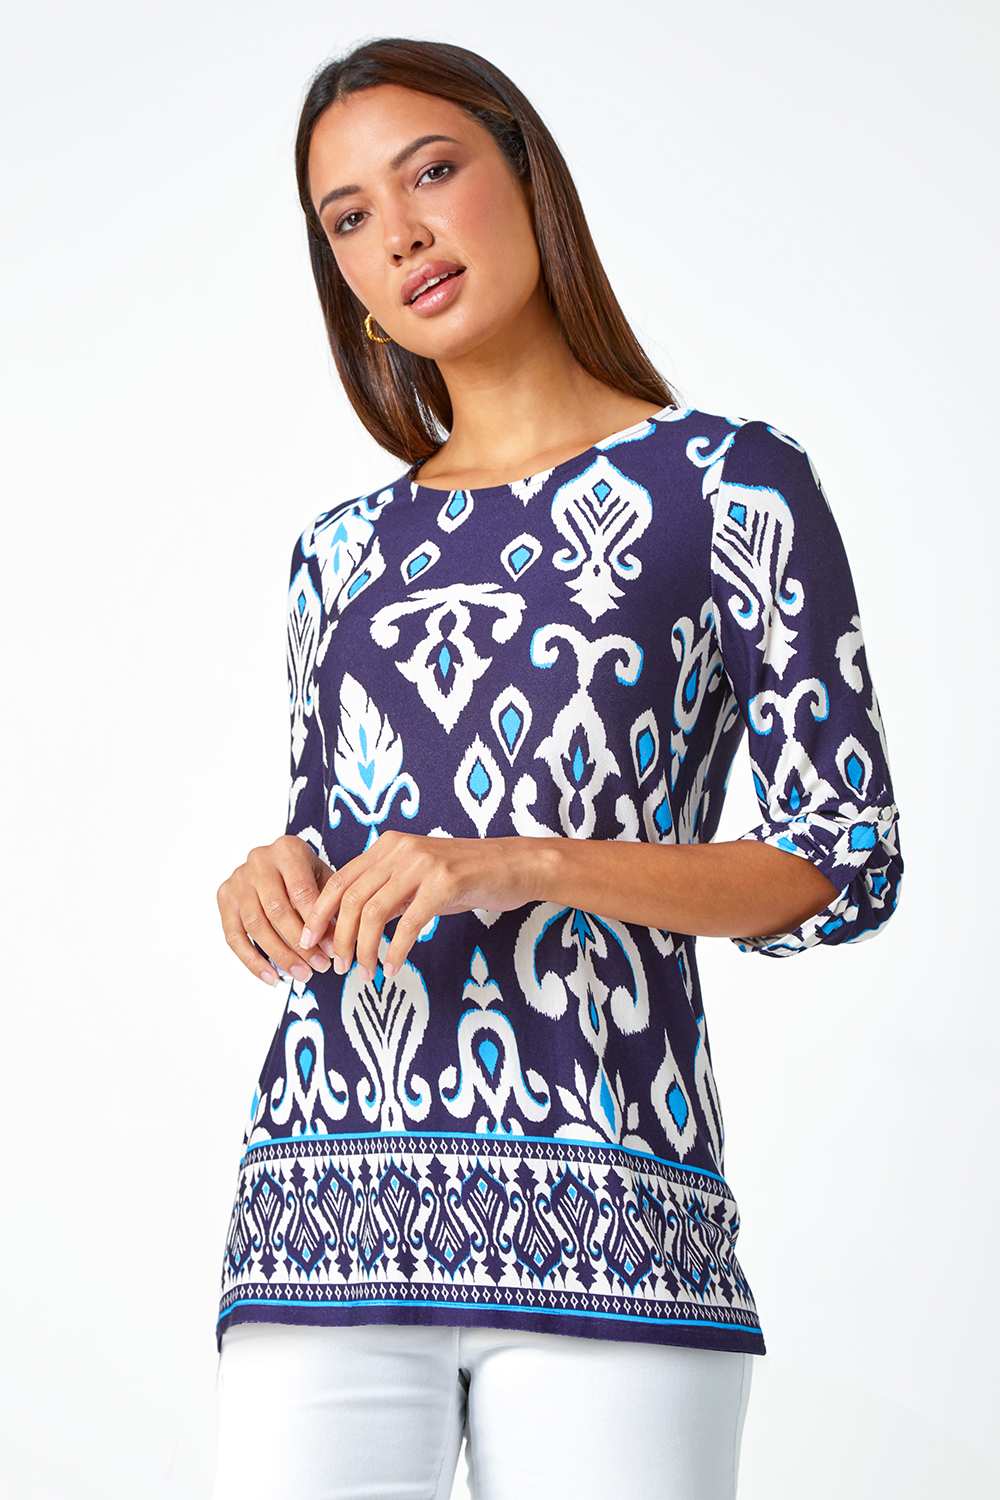 Blue Border Print Stretch Jersey Top, Image 2 of 5